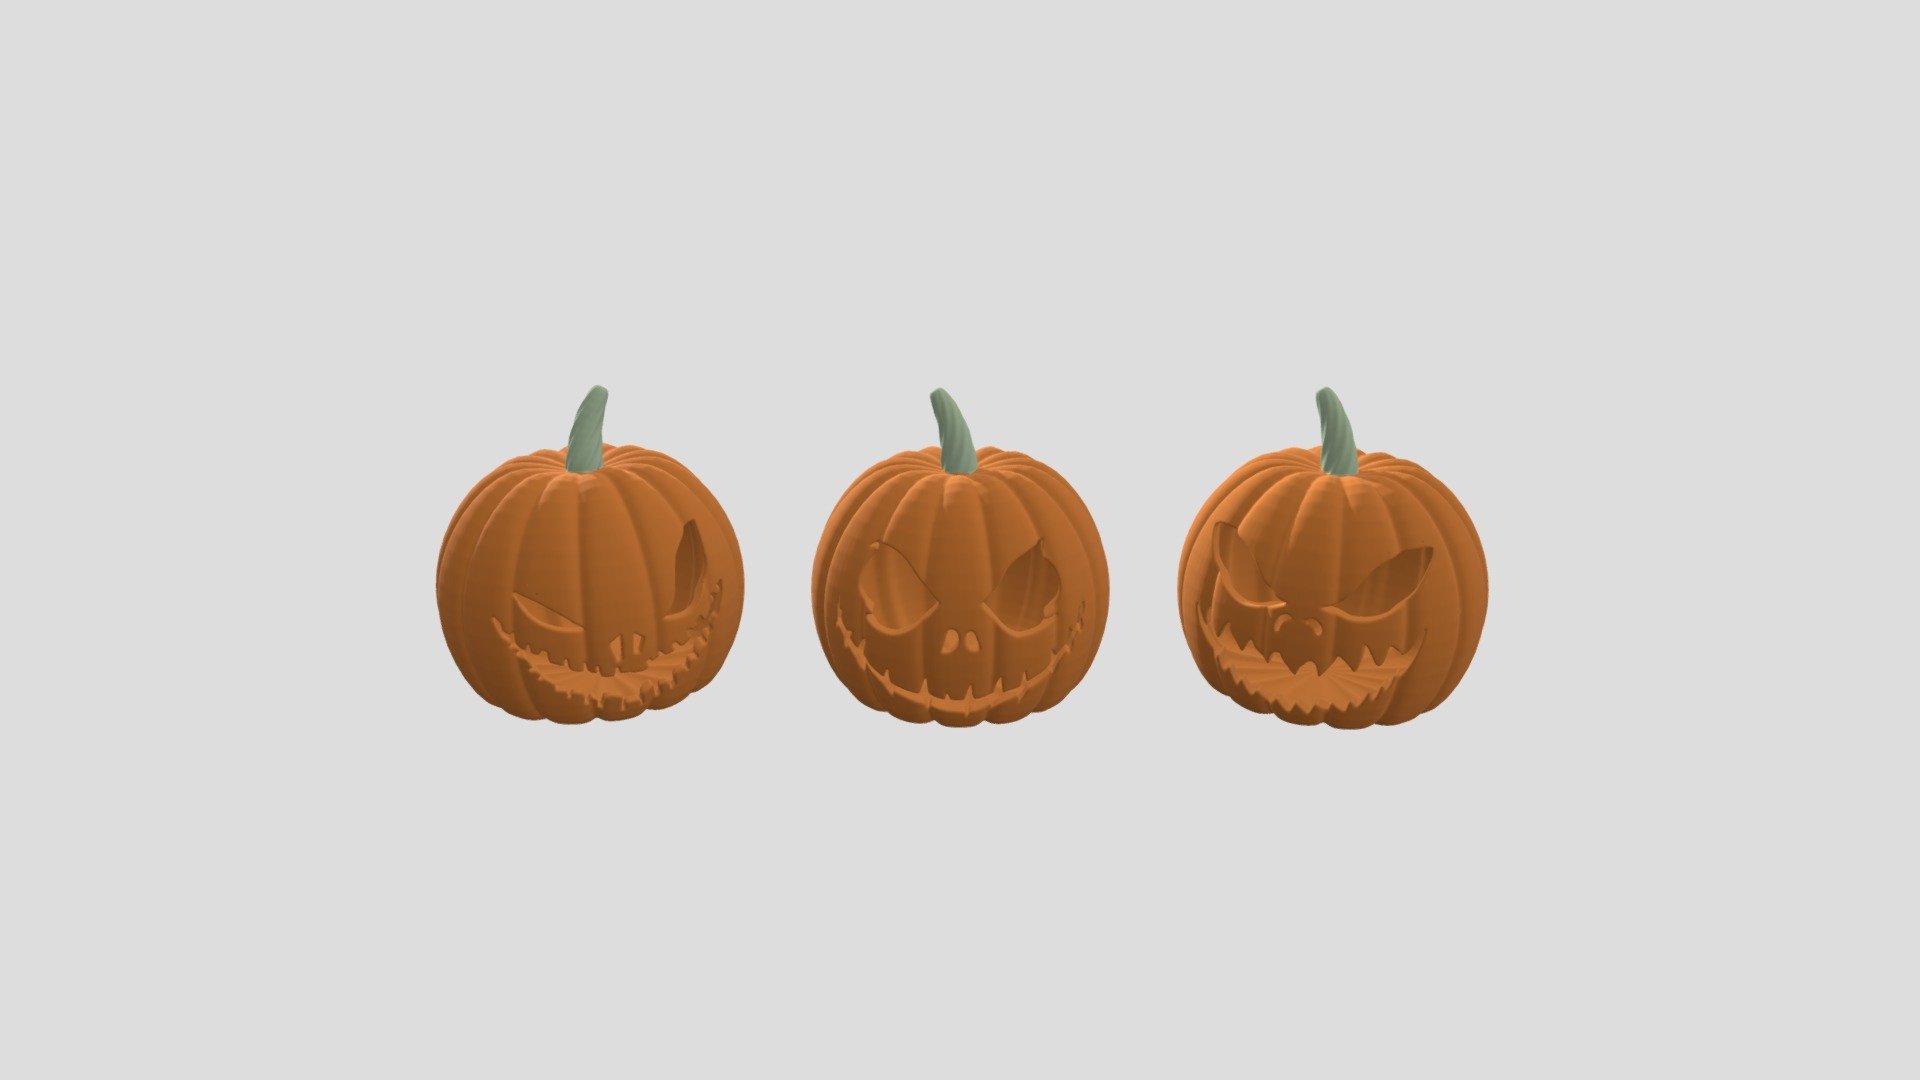 This is a great Jack O Lantern Halloween Pumpkins 3D model for you projects. 

There are 3 different Pumpkin Faces

Created in Cinema4D R25. No third party plugins needed. Standard Render with standard materials. 

Formats included: .c4d .obj .fbx .3ds 

Poly Count: 721218, Points Count: 713262, Object Count: 5

I hope you will like it. Also, make sure to check my other models. Don’t forget to leave the feedback and rate the models. Thank you

pumpkin, halloween, october, horror, jack, smile, lantern, face, orange, evil, scary, holiday, spooky, isolated, dark, fear, ghost, treat, trick, carved, jack-o-lantern, carving, yellow, emotion, hell, creepy, head, cartoon, halloween pumpkin, fall - Jack O Lantern Halloween Pumpkins - 3D model by ruslanmikaielian 3d model